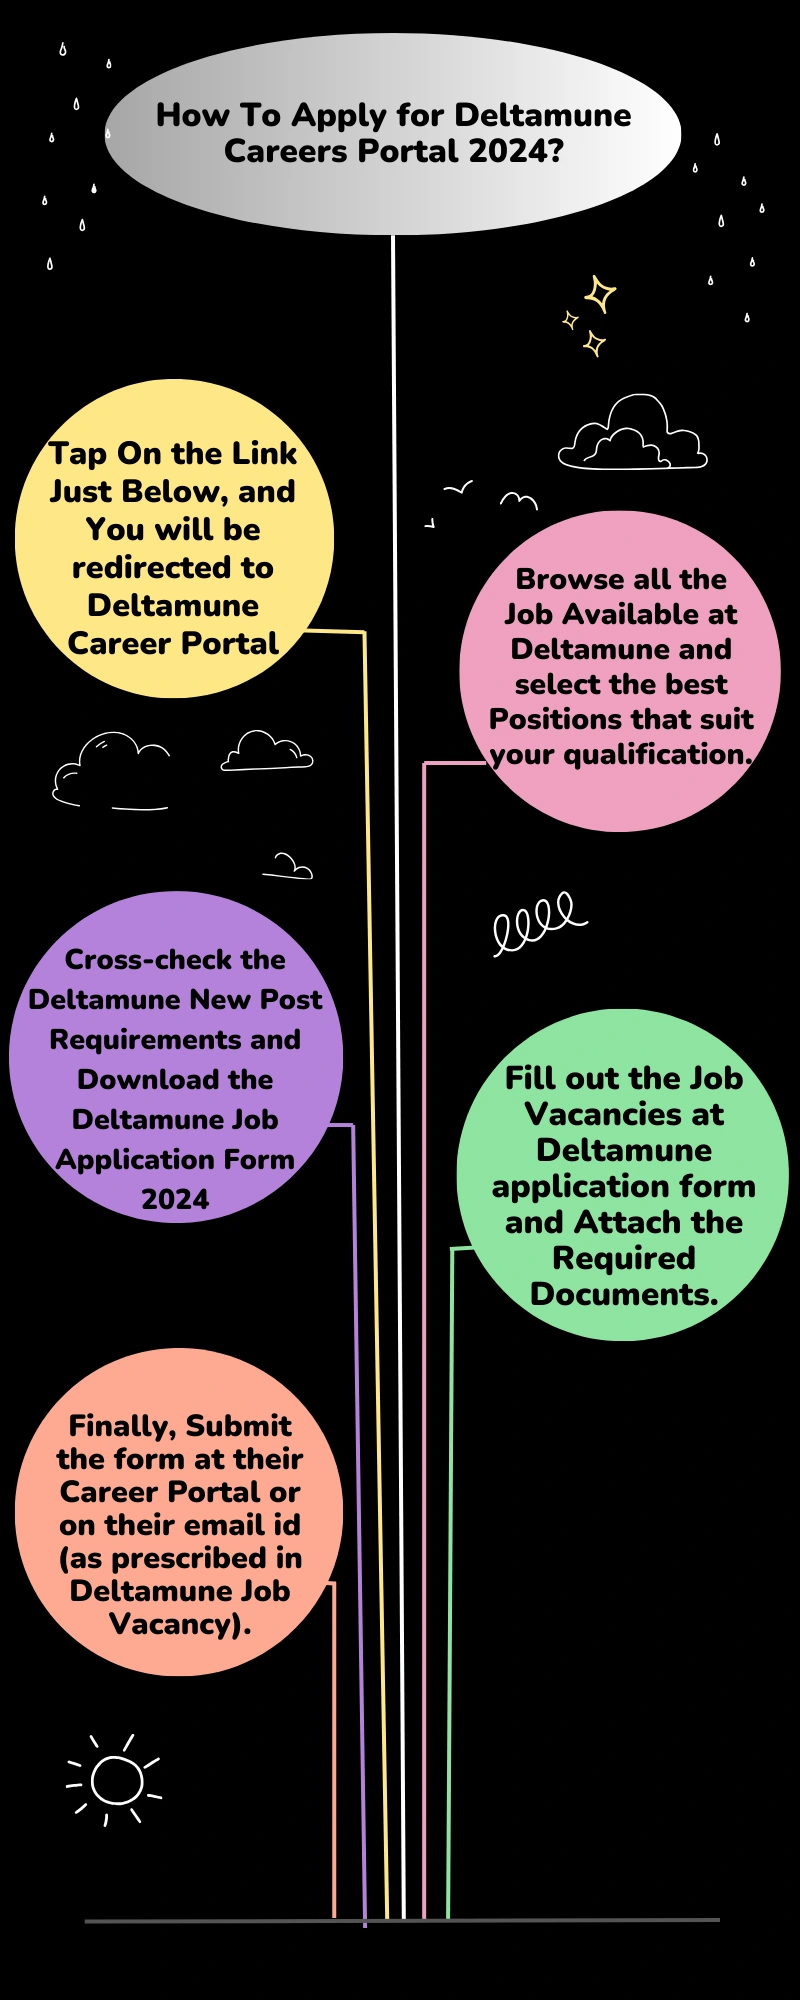 How To Apply for Deltamune Careers Portal 2024?